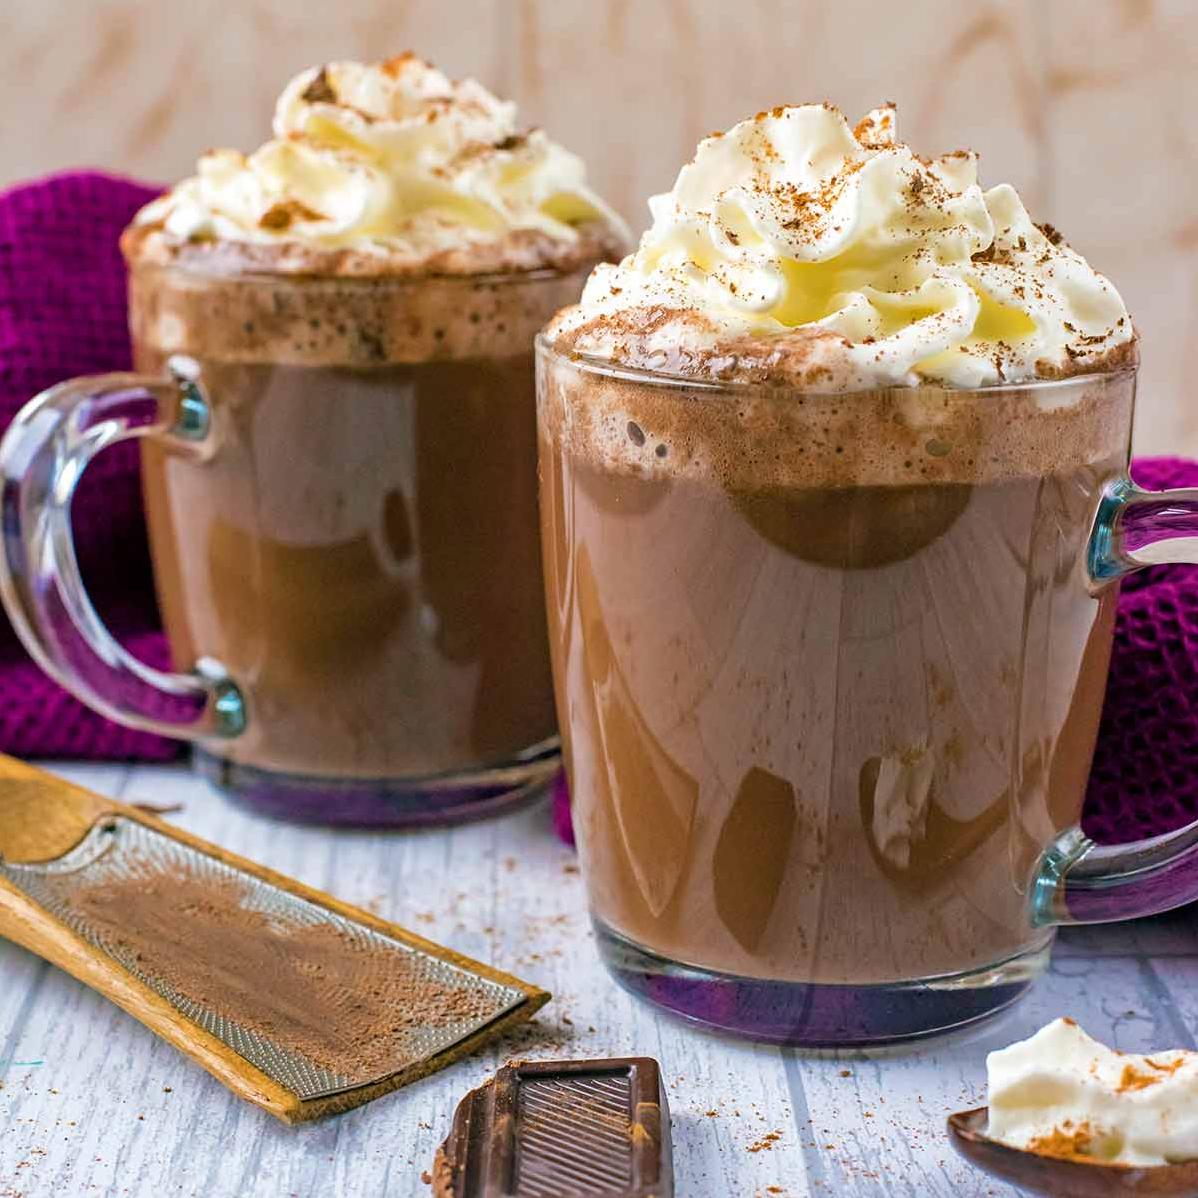  Why settle for just coffee or hot chocolate when you can have both?